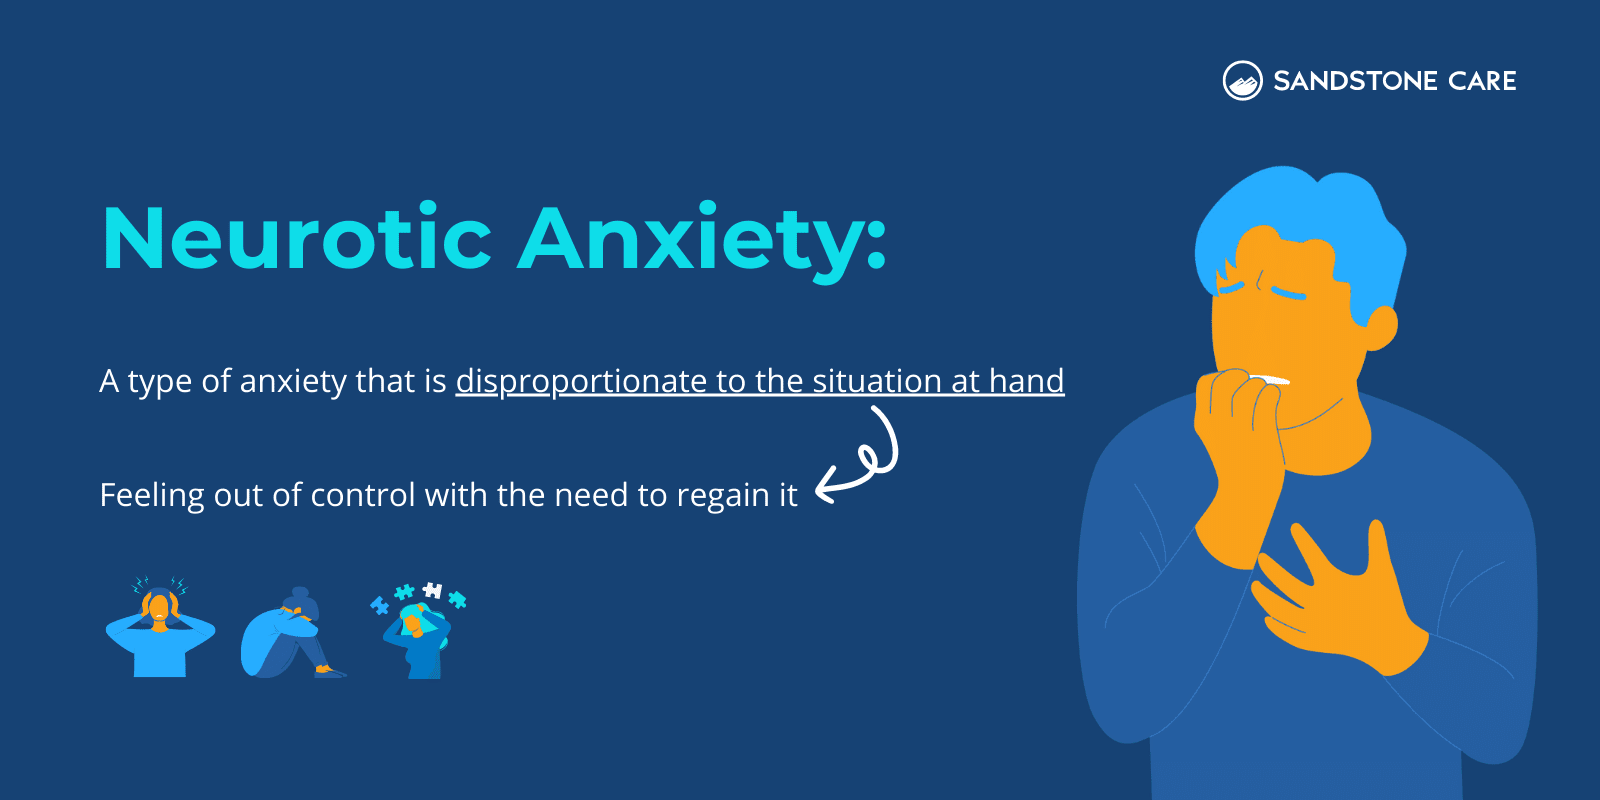 "Neurotic Anxiety:" written above the definition illustrated with relevant graphics depicting different symptoms of neurotic anxiety